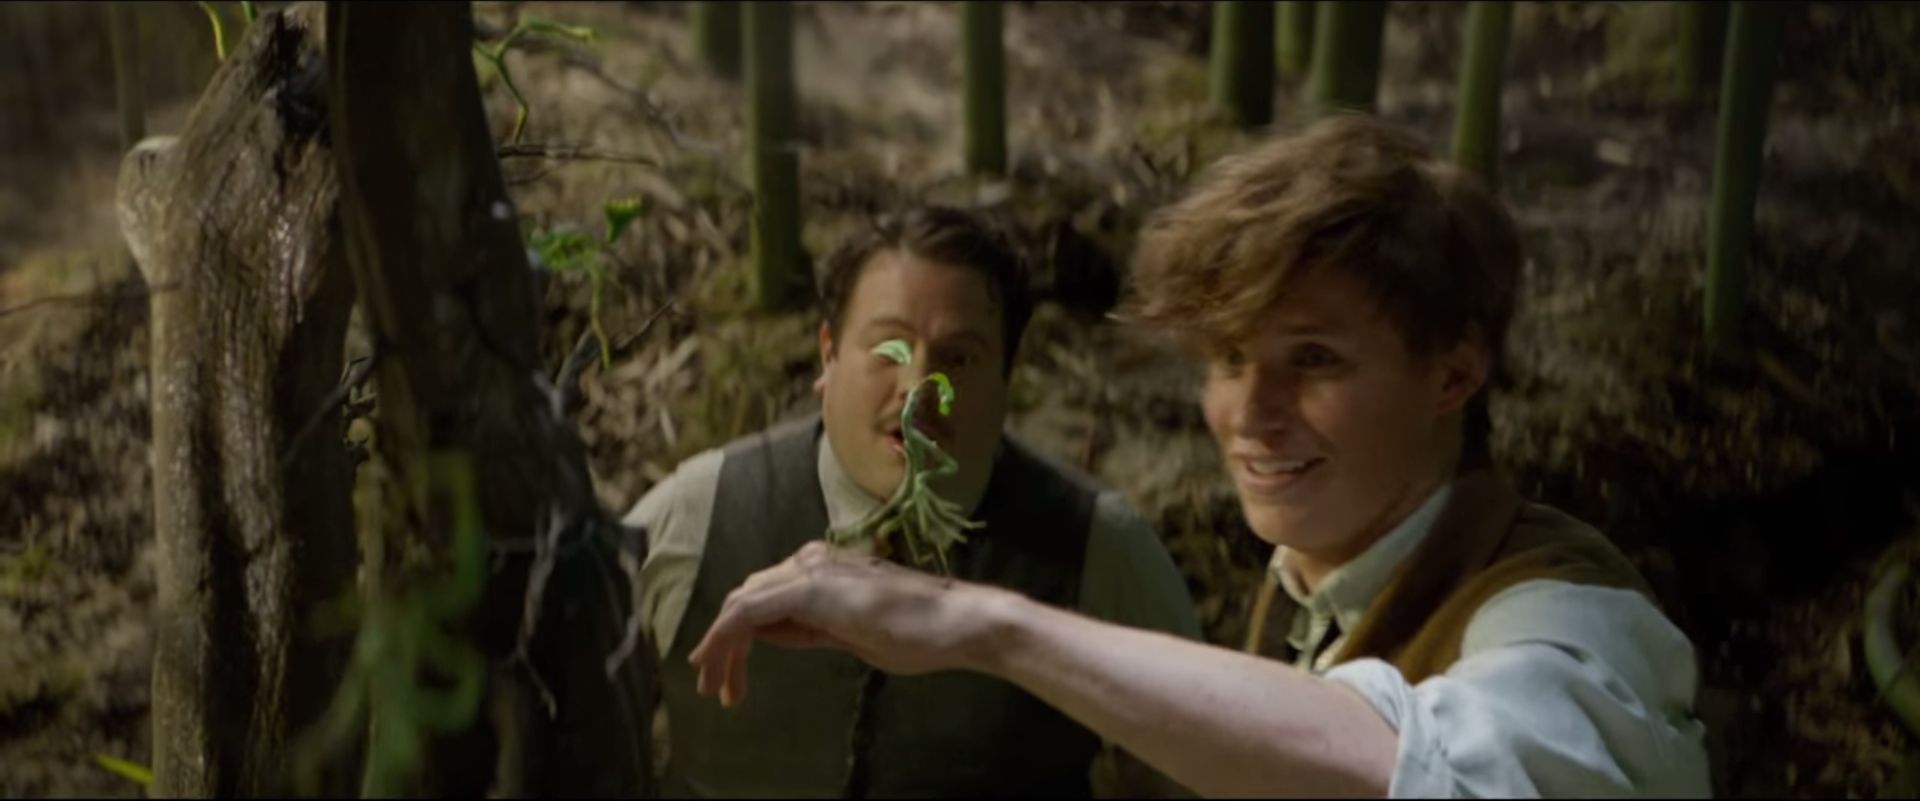 Fantastic Beasts And Where To Find Them 2016 Film Online Watch